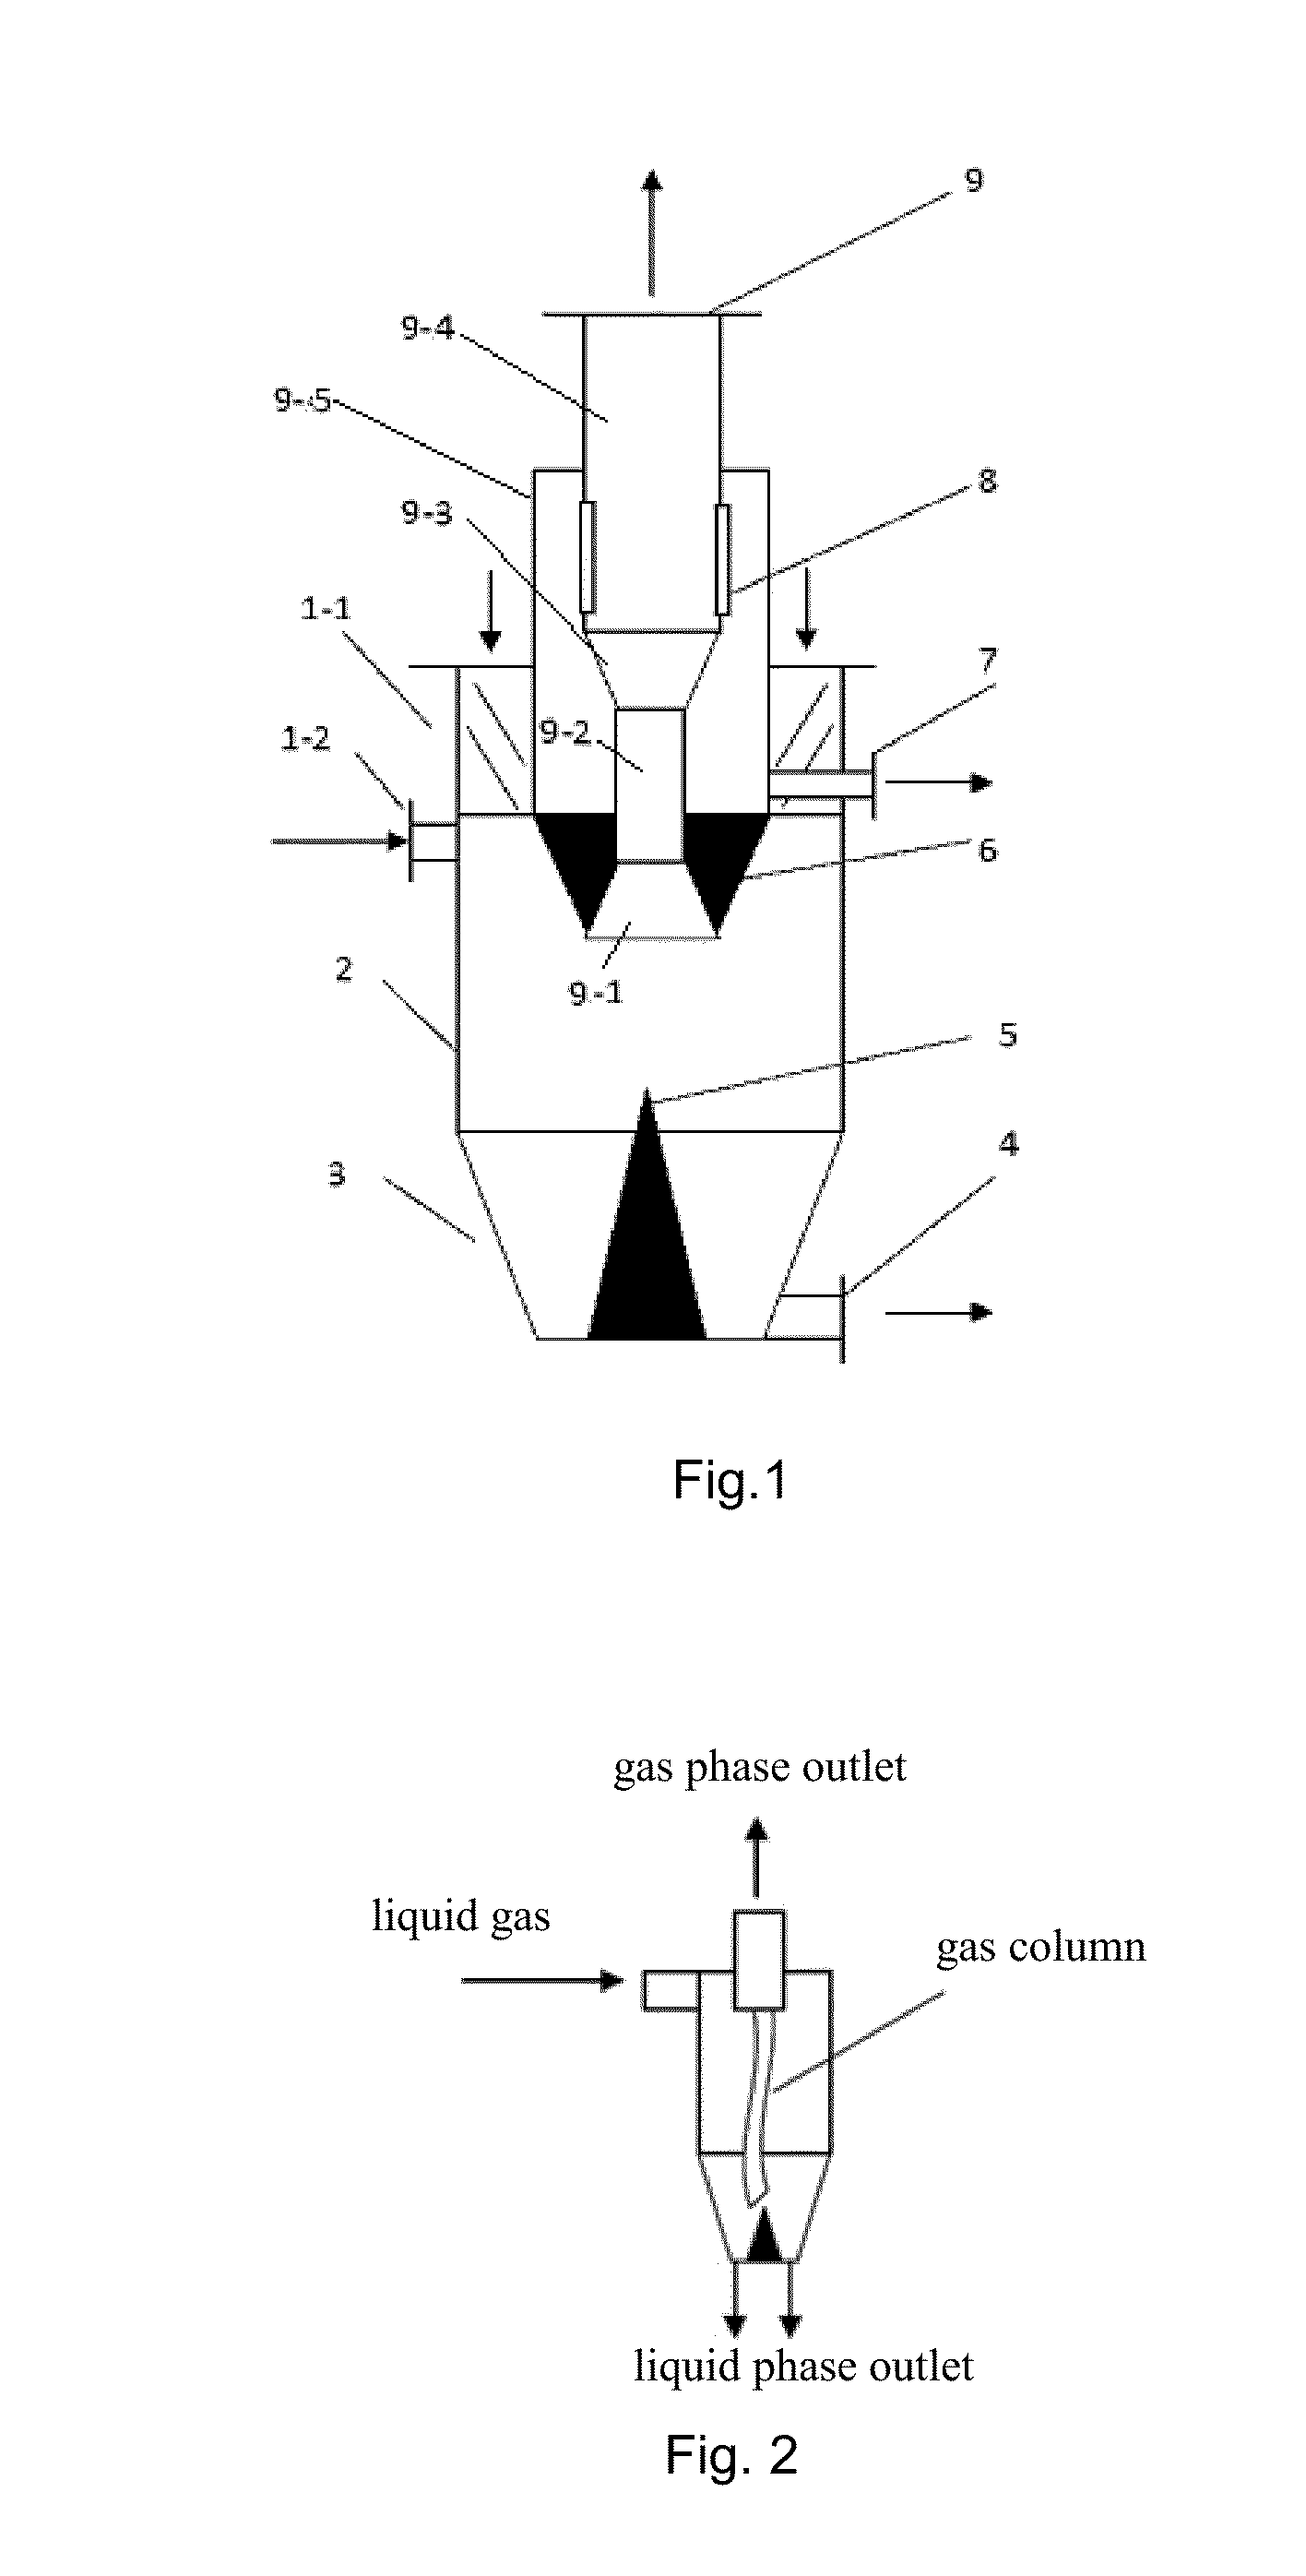 Apparatus for liquid degassing using coupling of swirling flow or centrifugal field and pressure gradient field